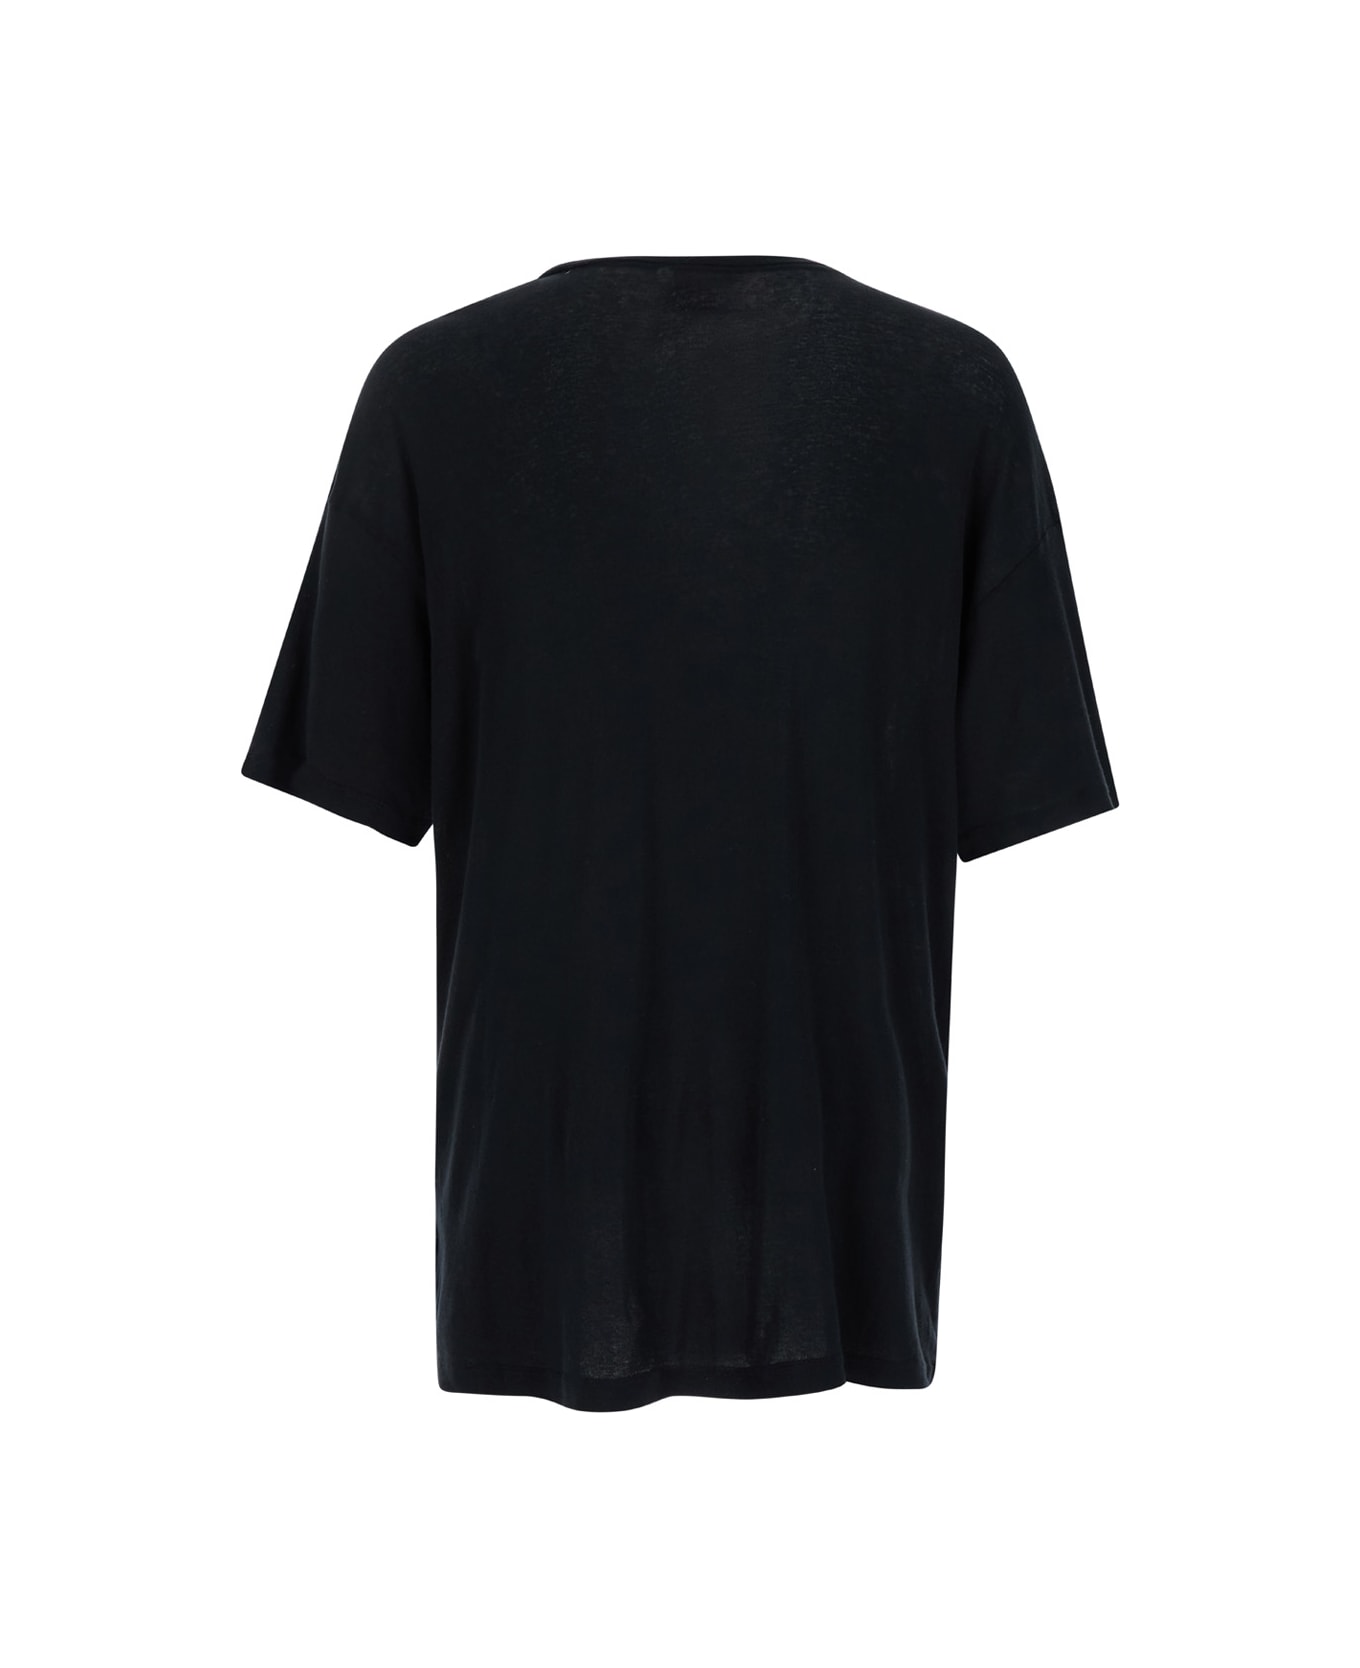 ERL Oversized Black T-shirt With Baby Print In Cotton Man - Black シャツ